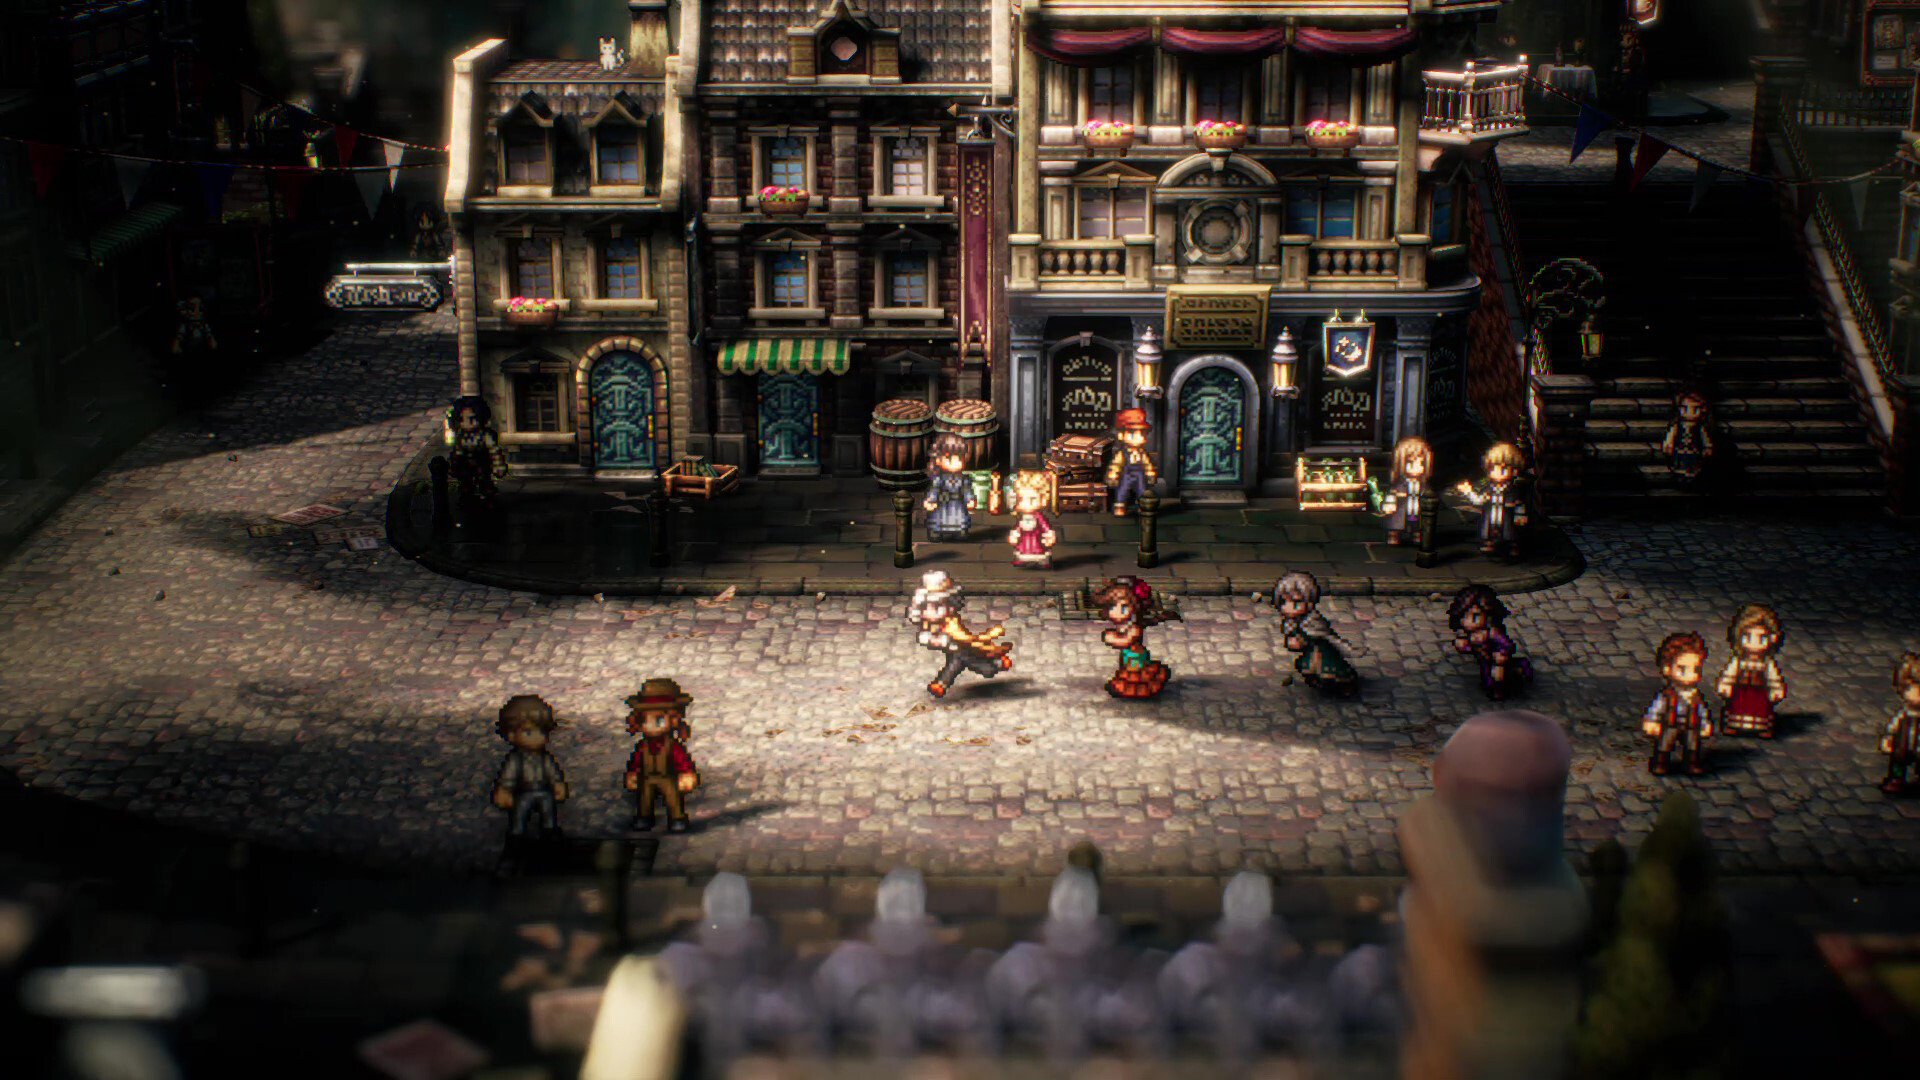 HD-2D trademarked by Square Enix in Europe